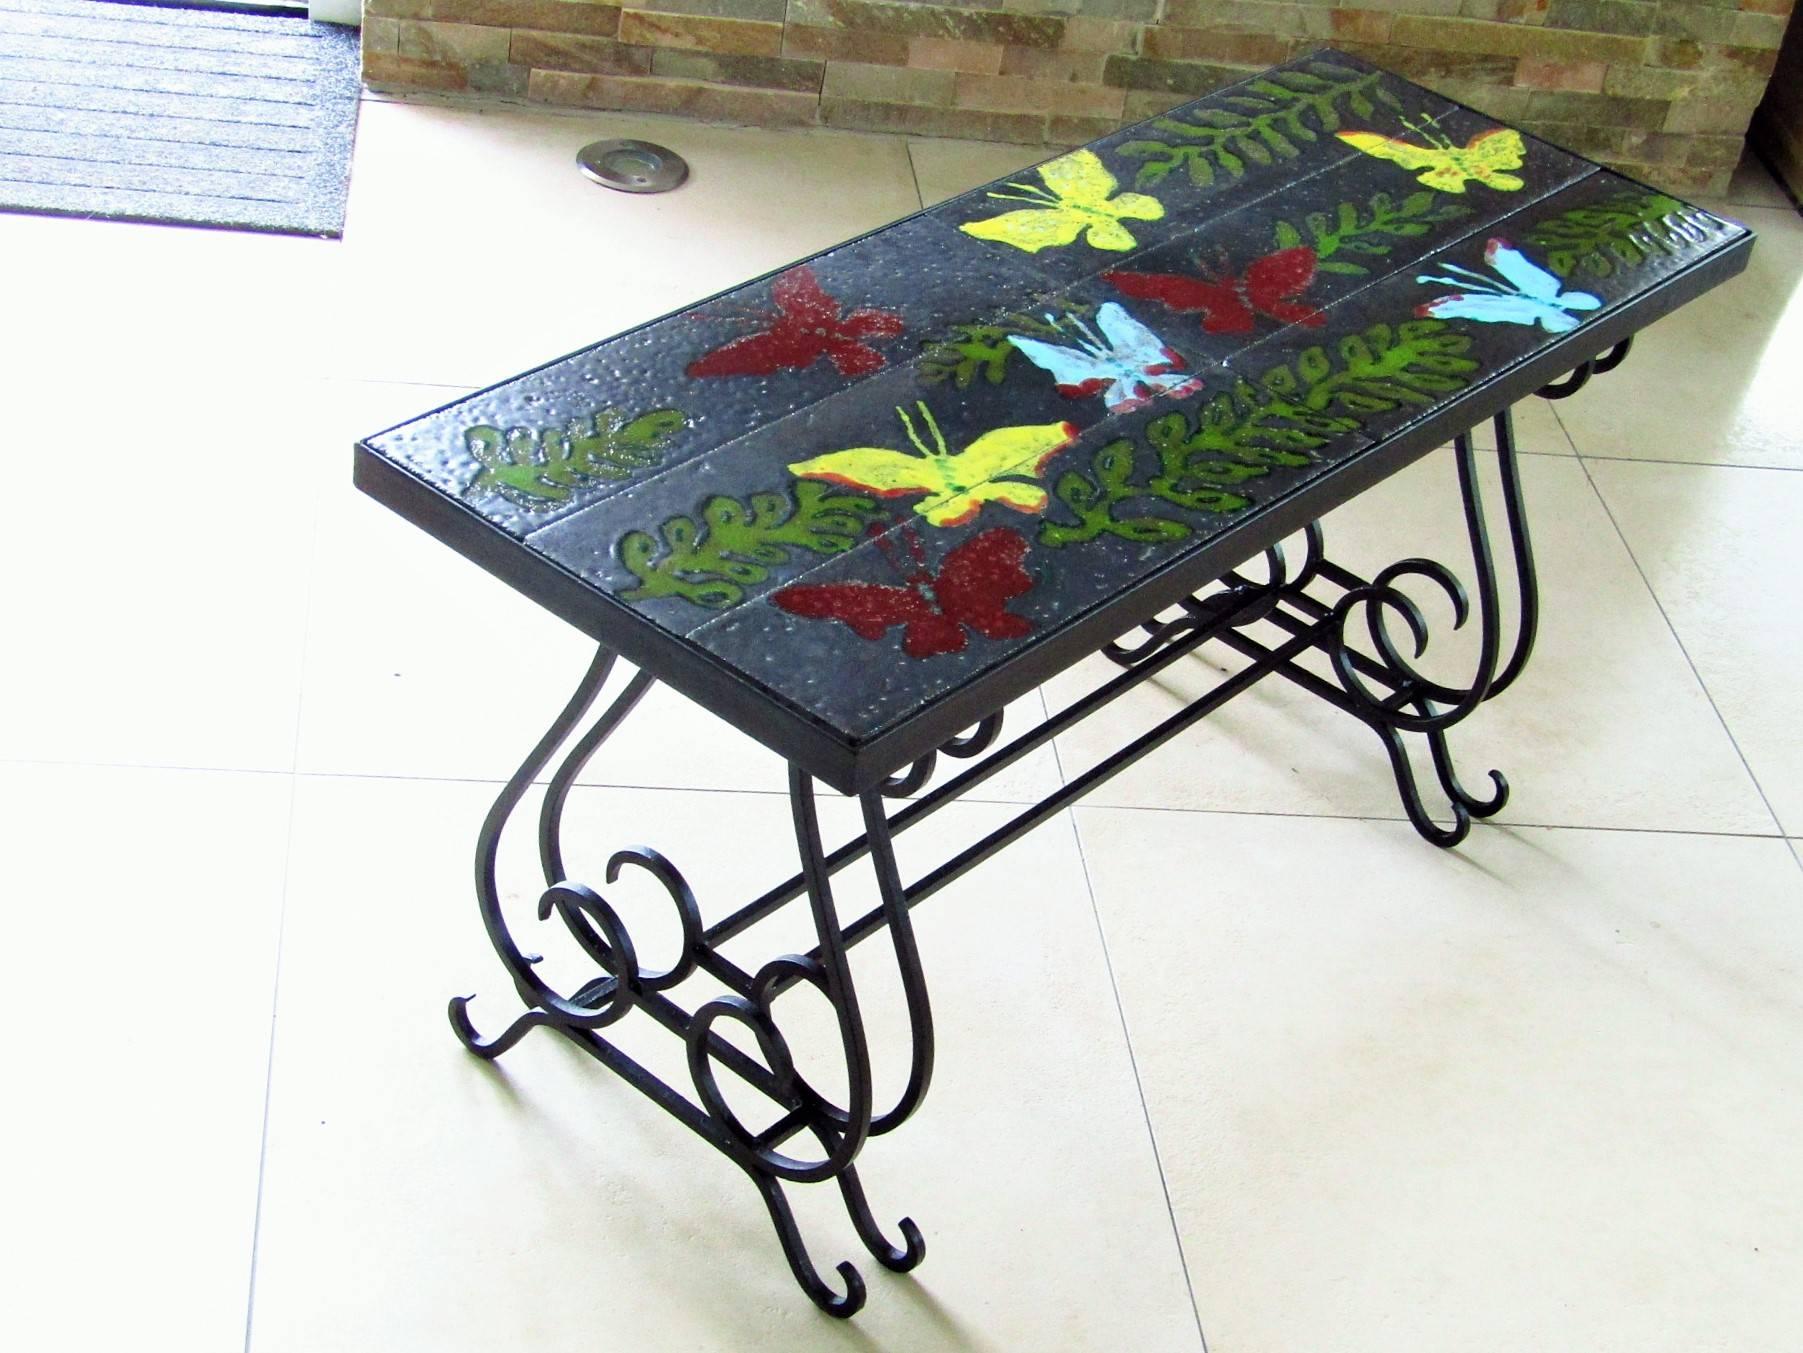 Mid-Century coffee table with lavastone tiles from Vallauris. Hand-painted and enameled Decor. Base solid wrought iron, France, circa 1940.

Jacques Adnet used the same tiles (see google: table - adnet) for his work. These tiles are a very early